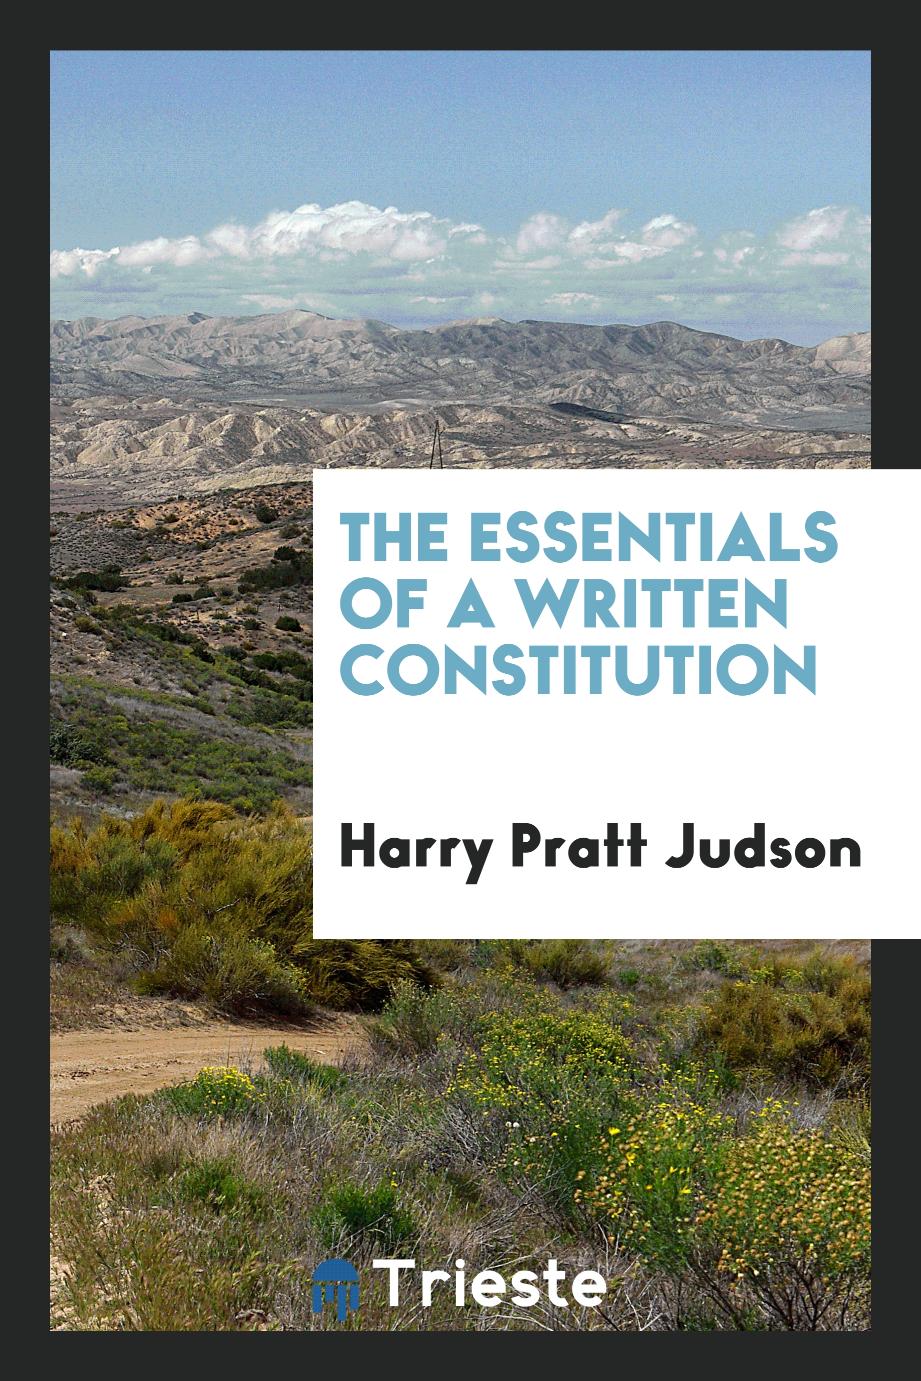 The Essentials of a Written Constitution